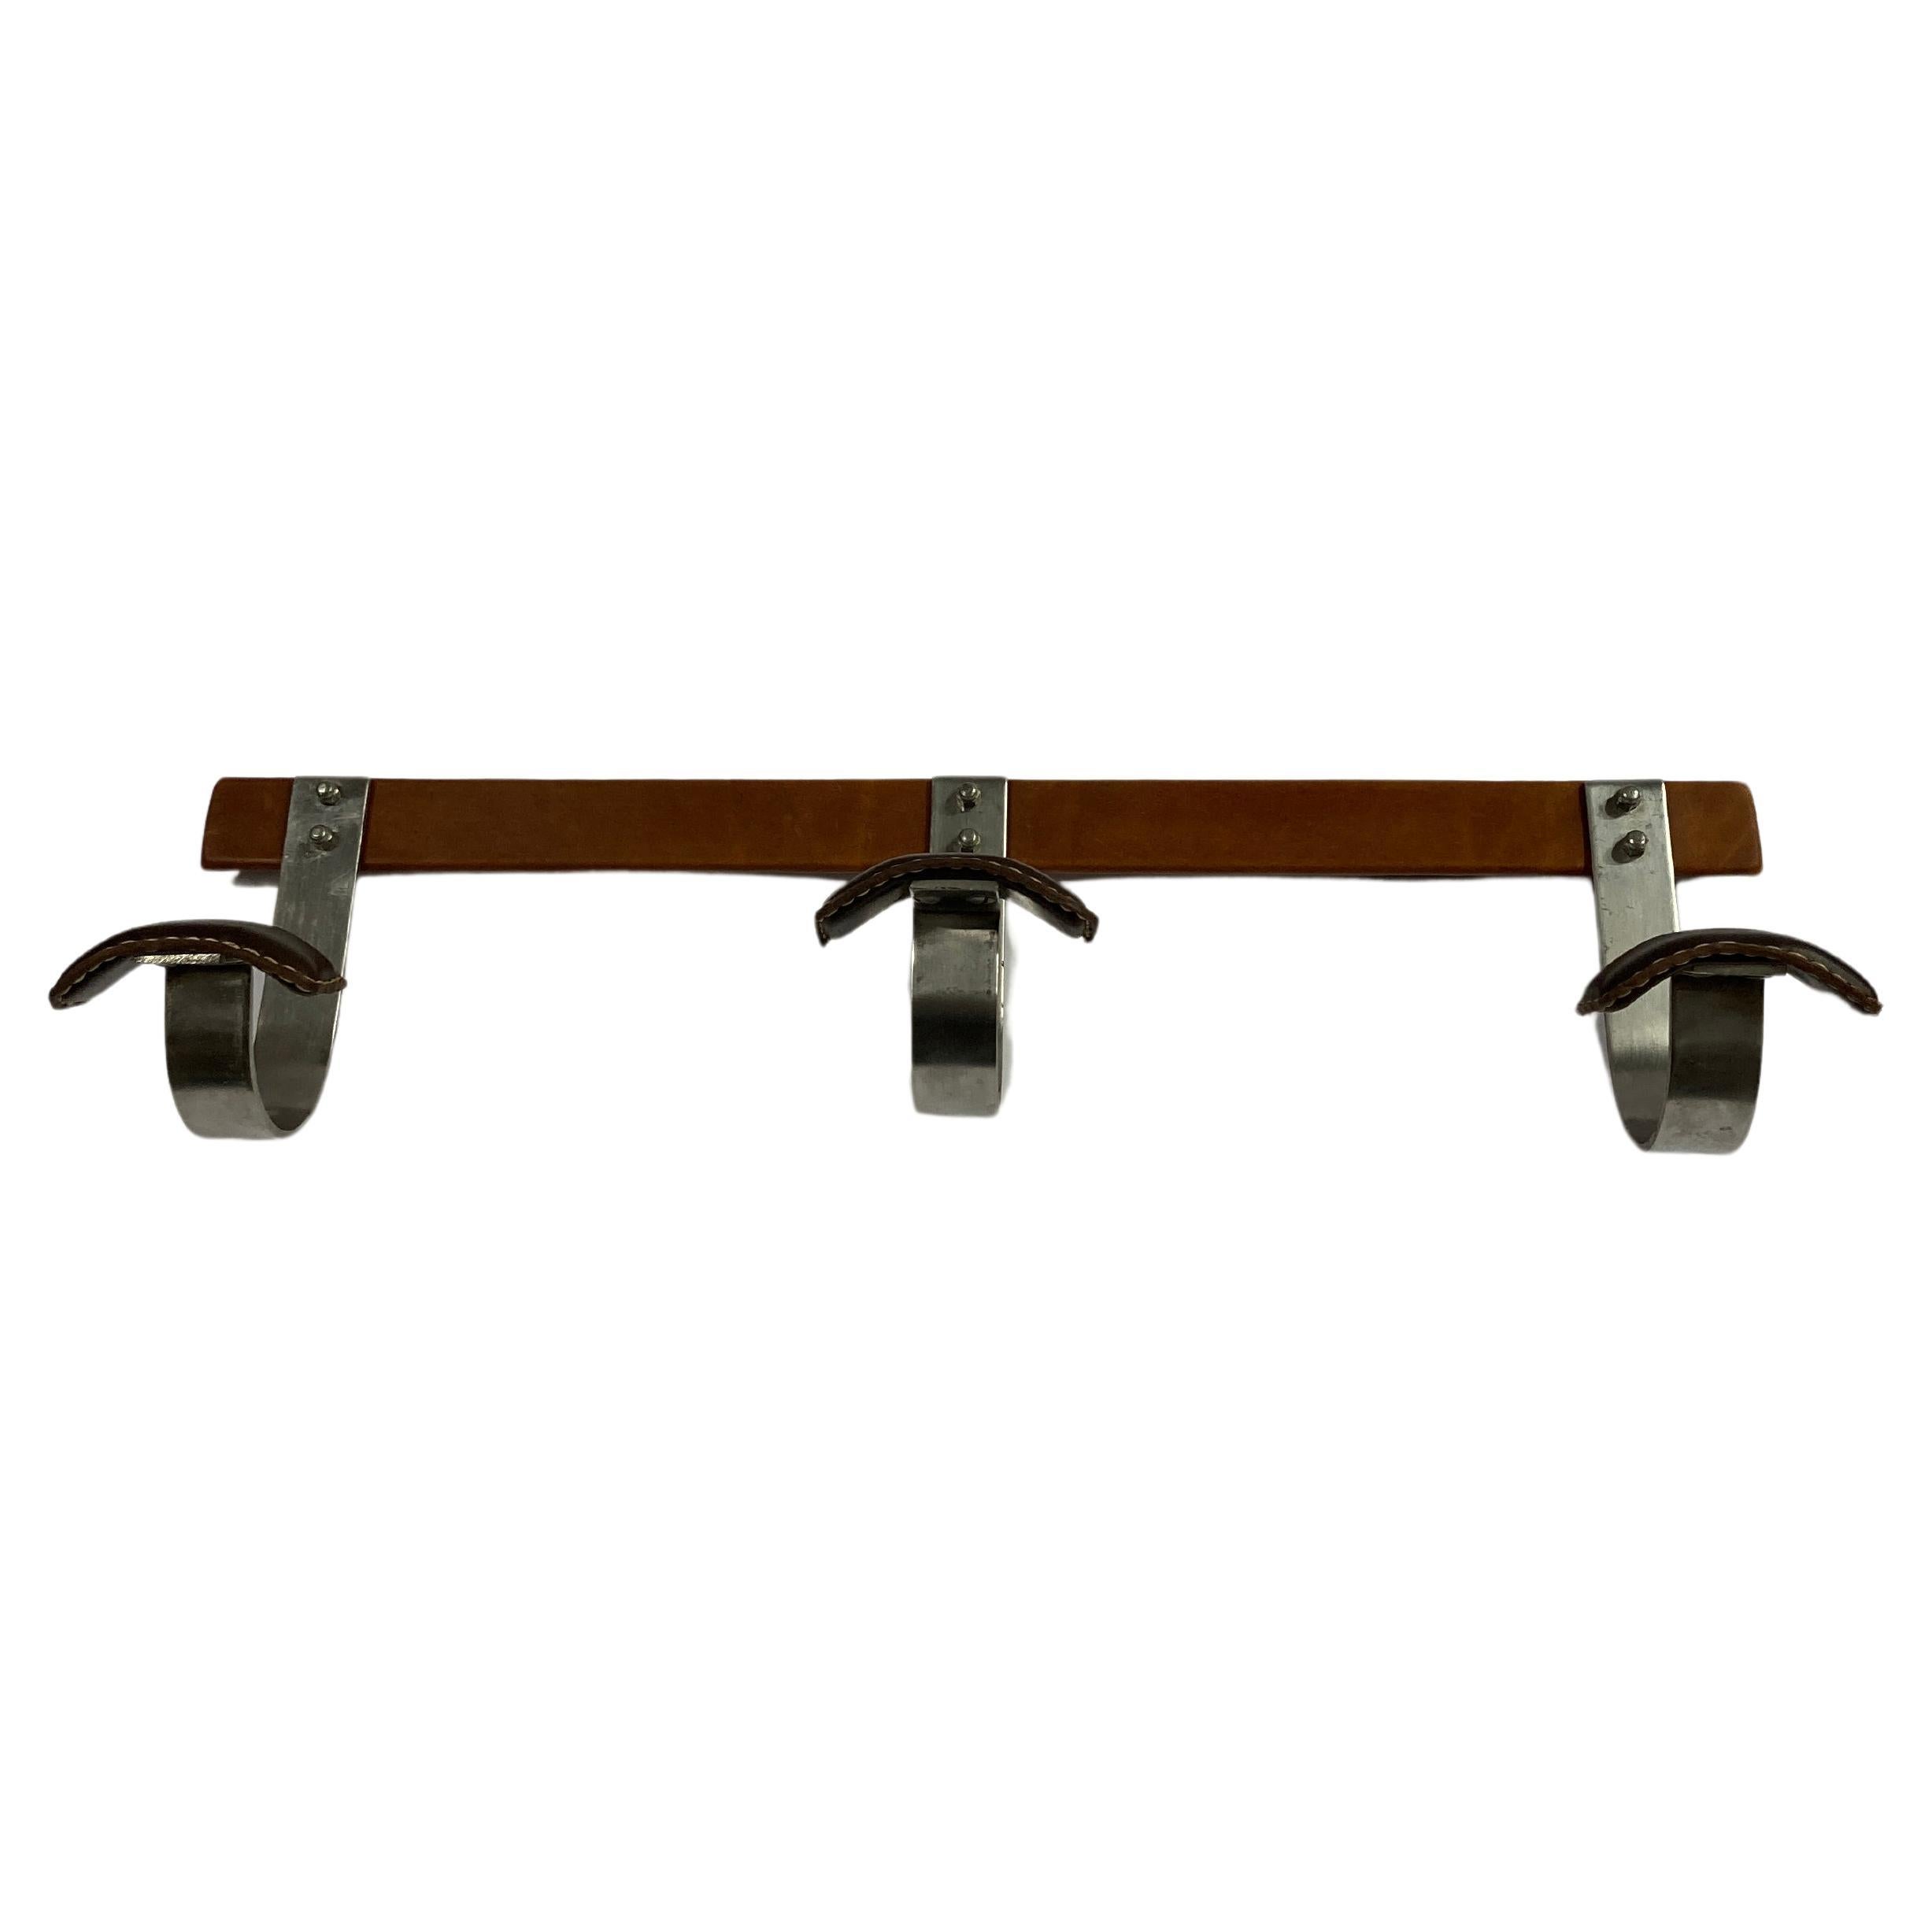 1950's Stitched Leather coat rack von Jacques Adnet im Angebot